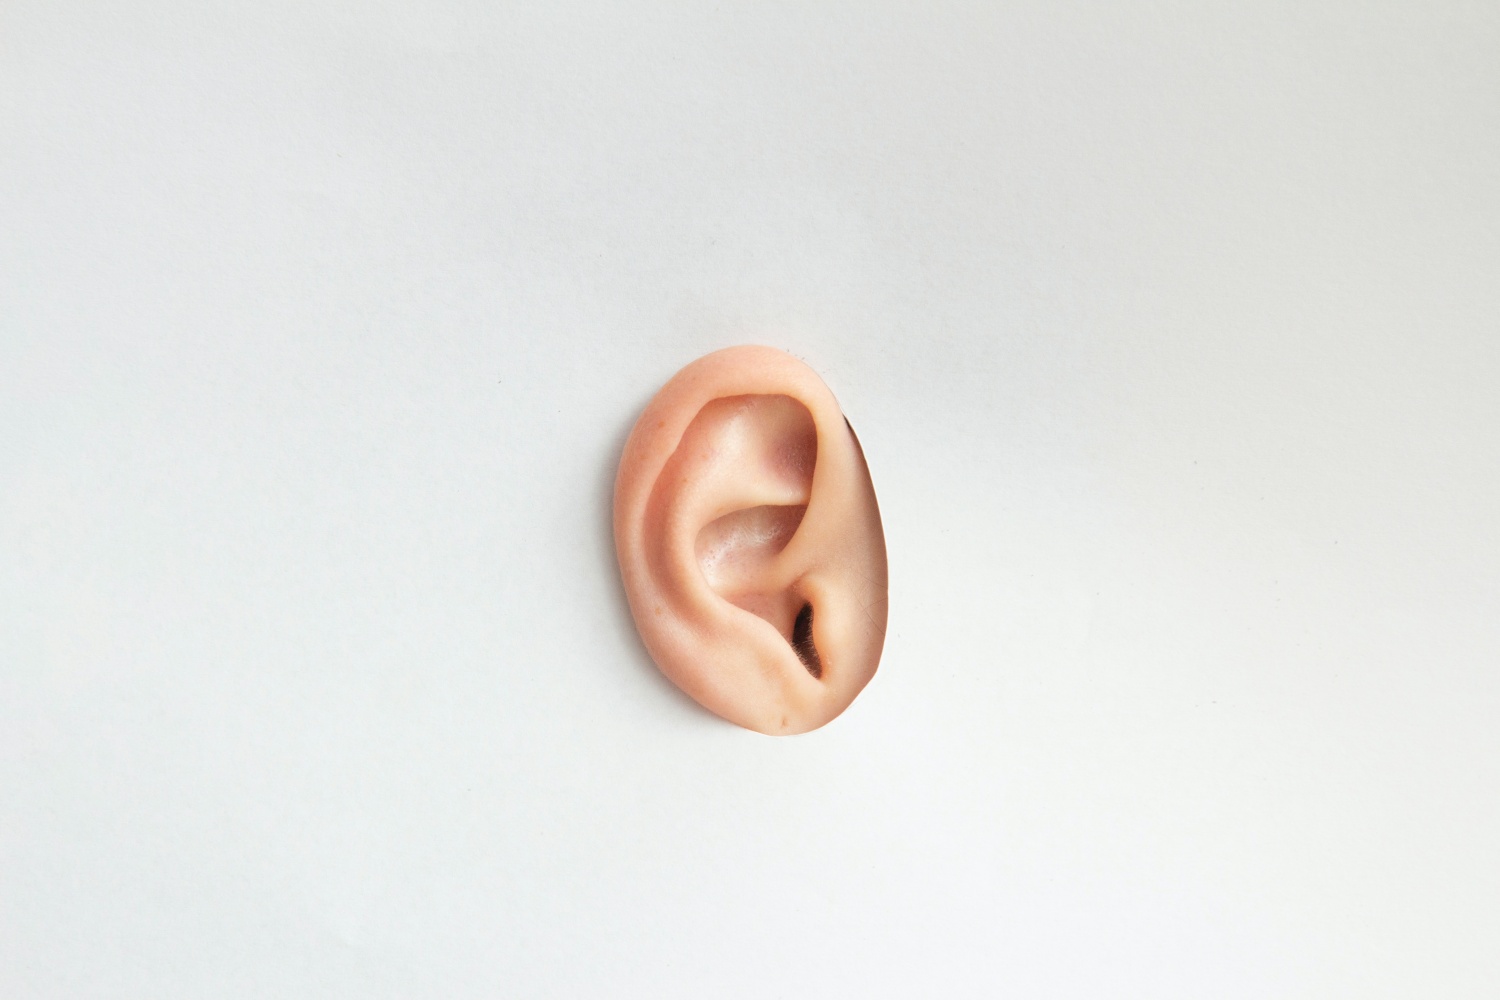 Game Changing 'Dime-Sized' Hearing Aid Helps Millions of Americans but Costs $12,000 a Pair